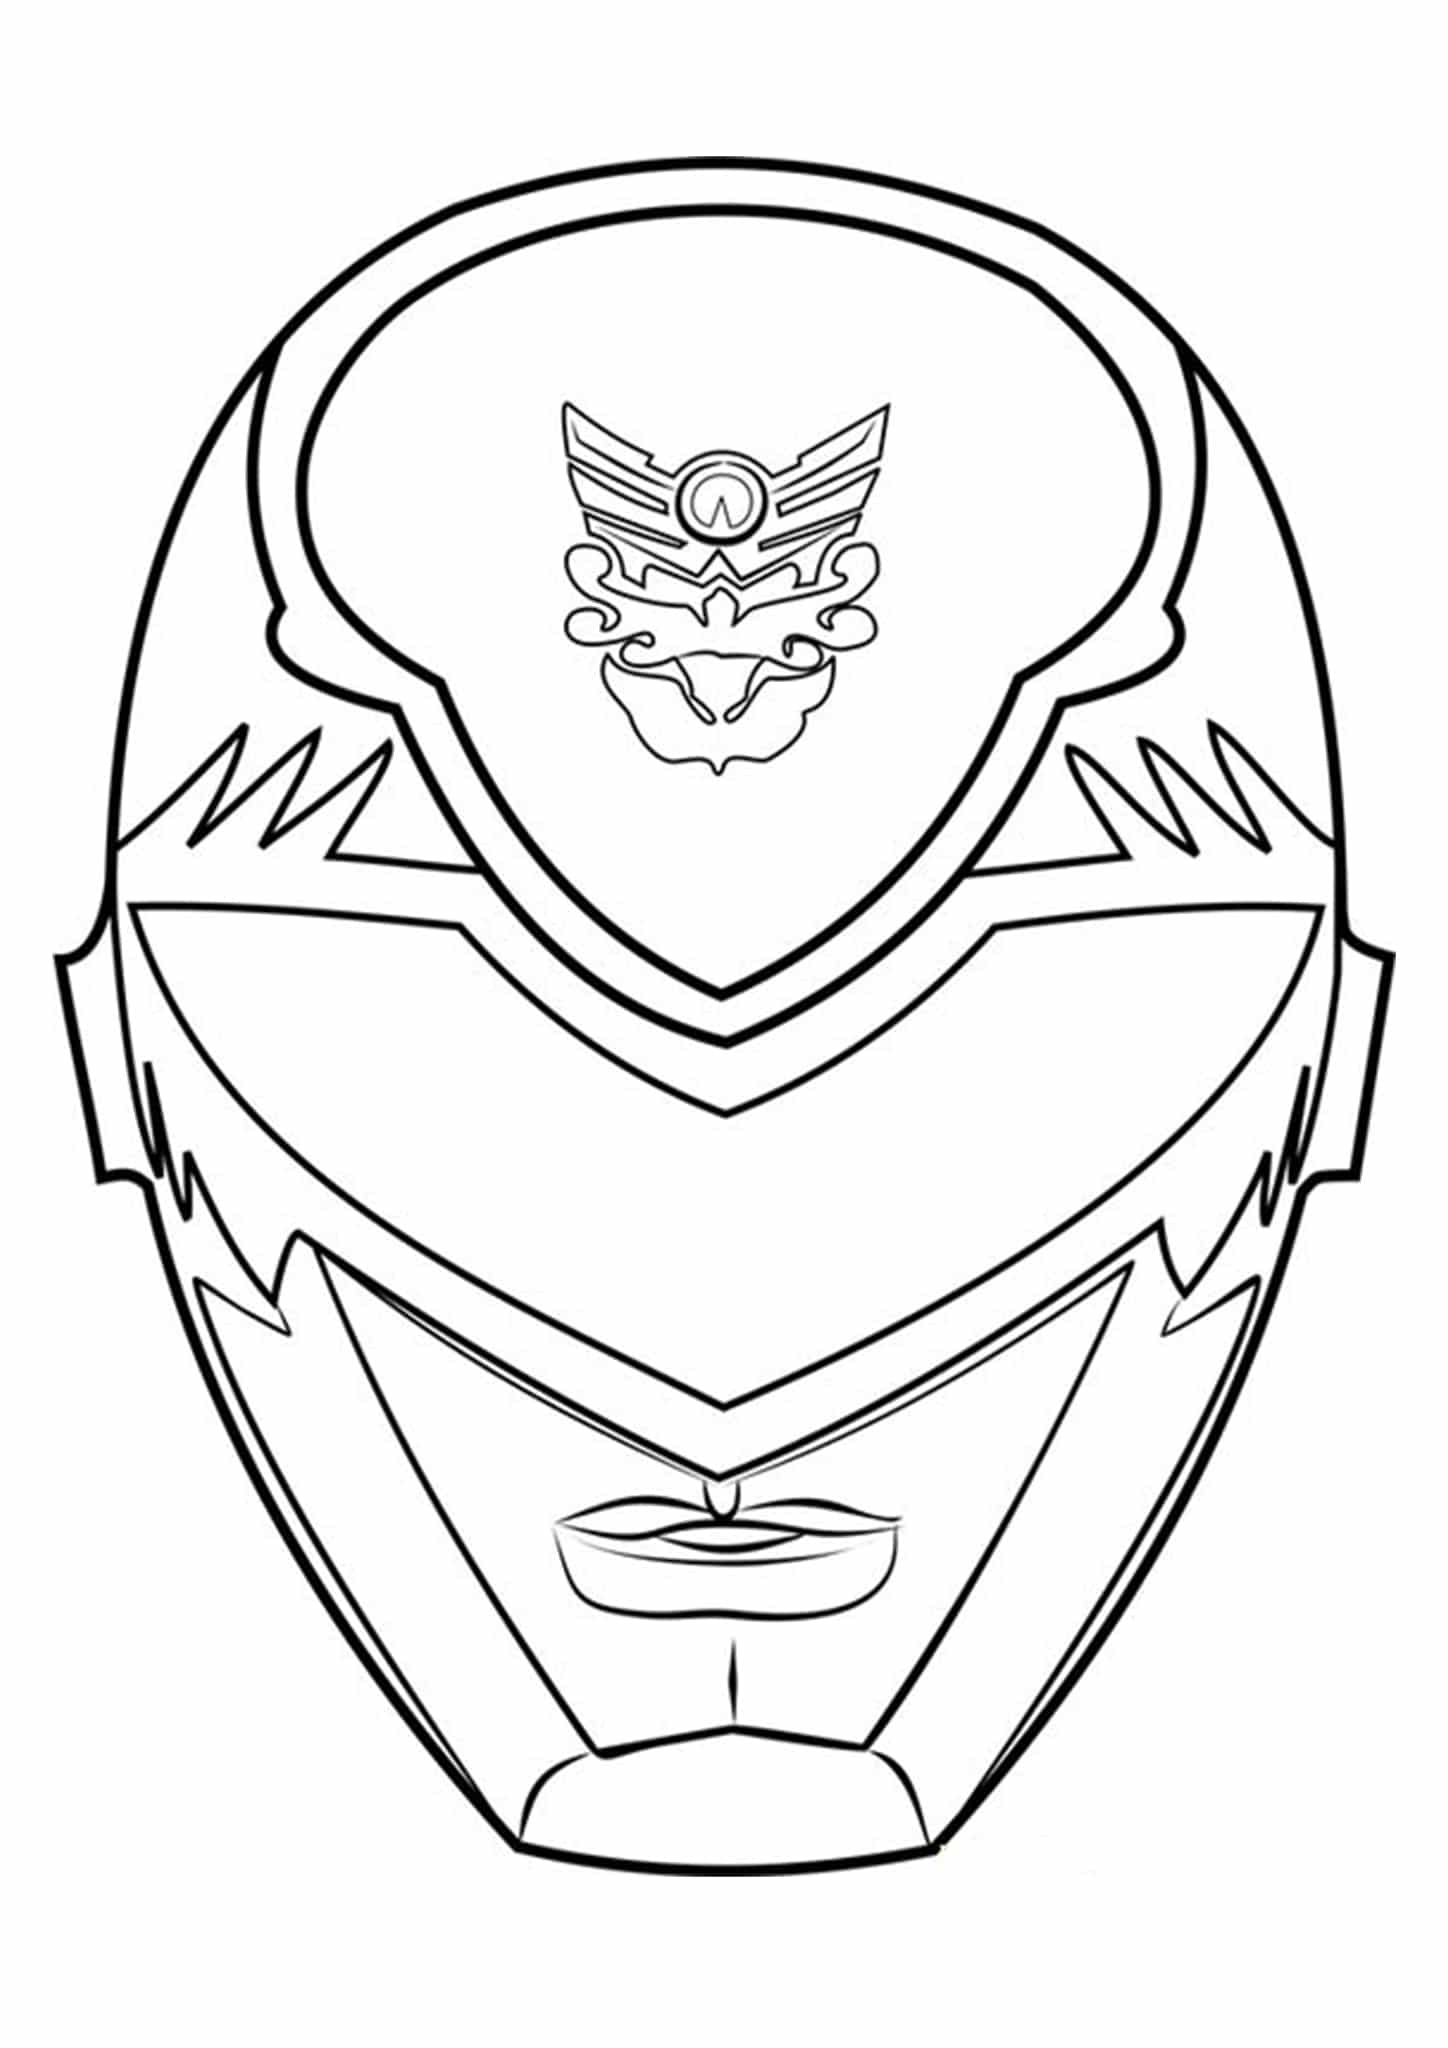 Power Ranger Mask Coloring Page - Free Power Rangers Coloring Pages :  ColoringPages101.com